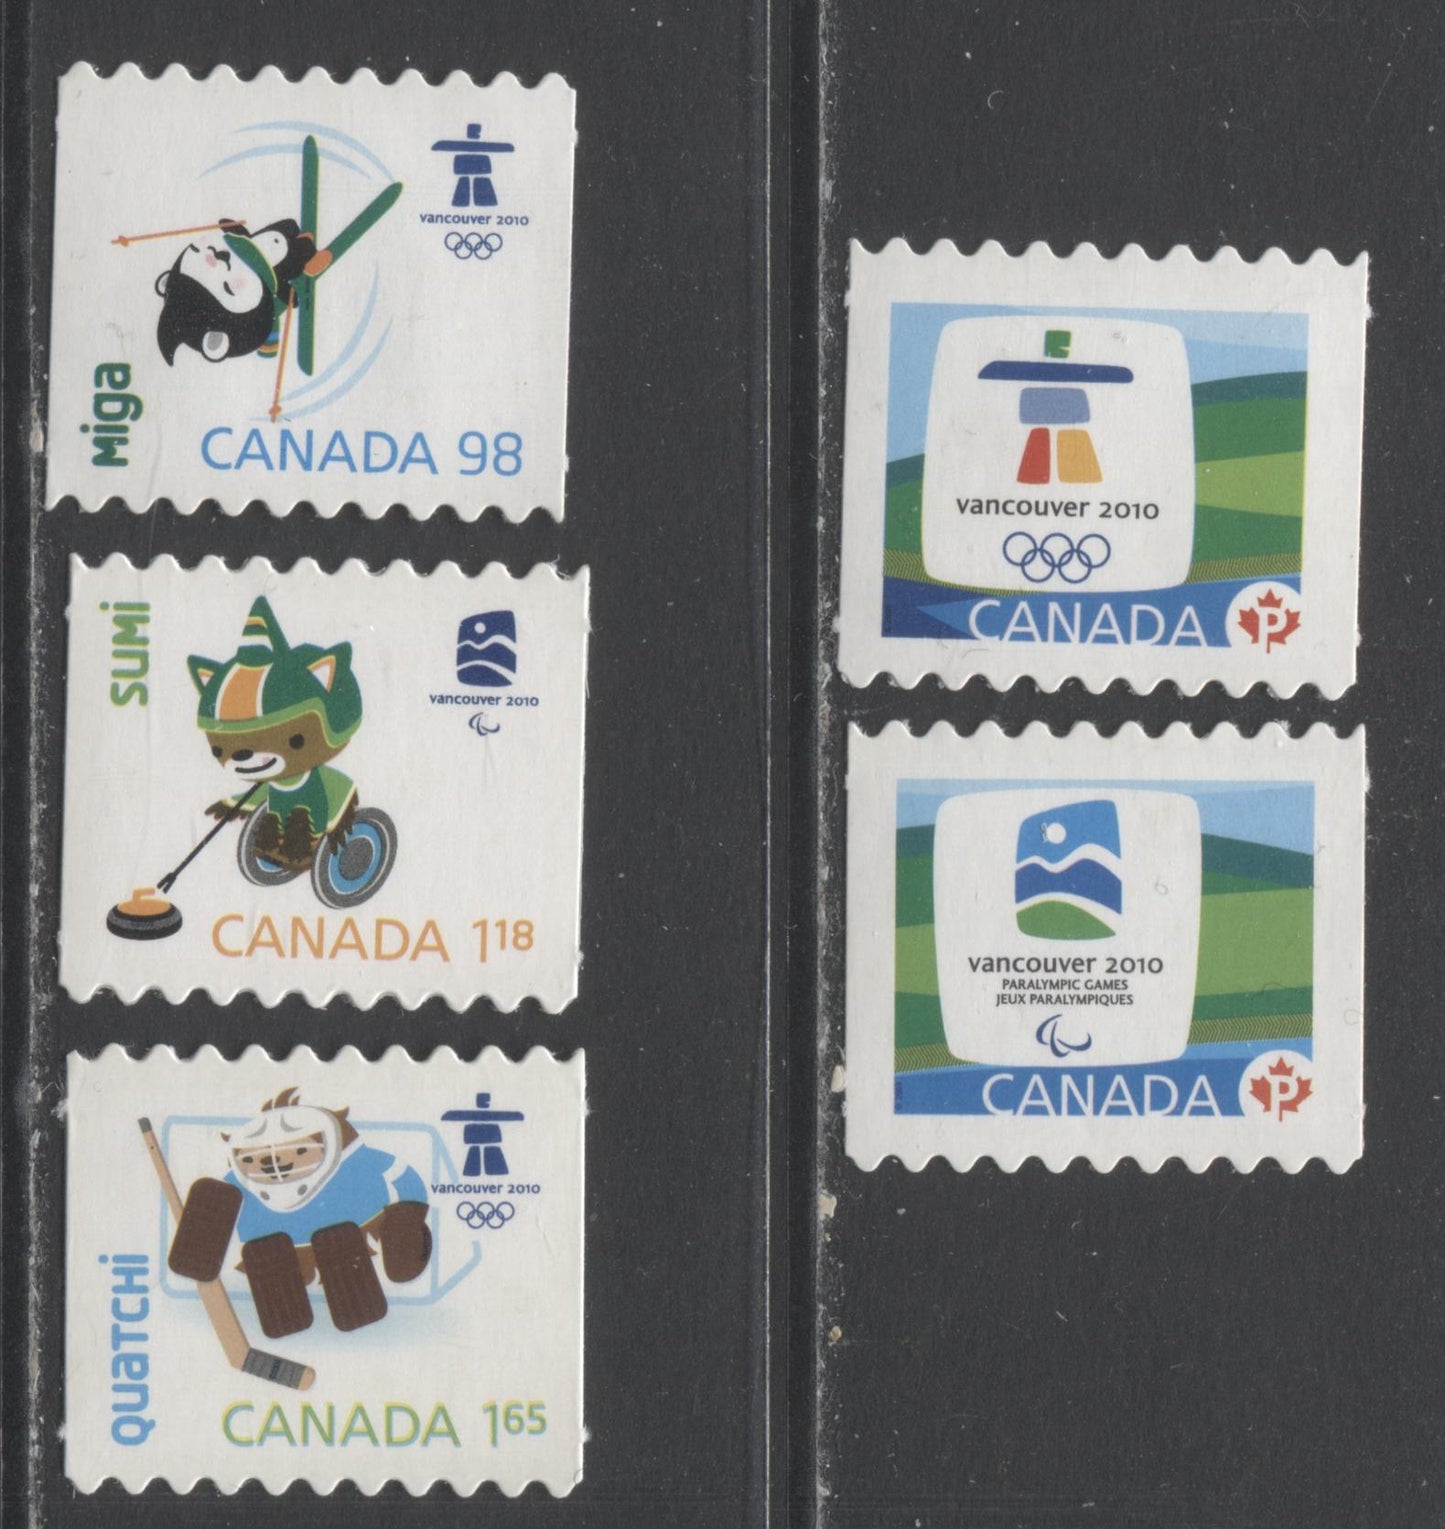 Lot 101 Canada #2307Ai,Bi,2308ii,2309ii,2310ii p(54c)-$1.65 Multicolored Olympic Emblems & Mascots, 2009 Olympic Definitives Coils & Booklets, 5 VFNH Coil Singles, Die Cut To Shape From Quarterly Packs